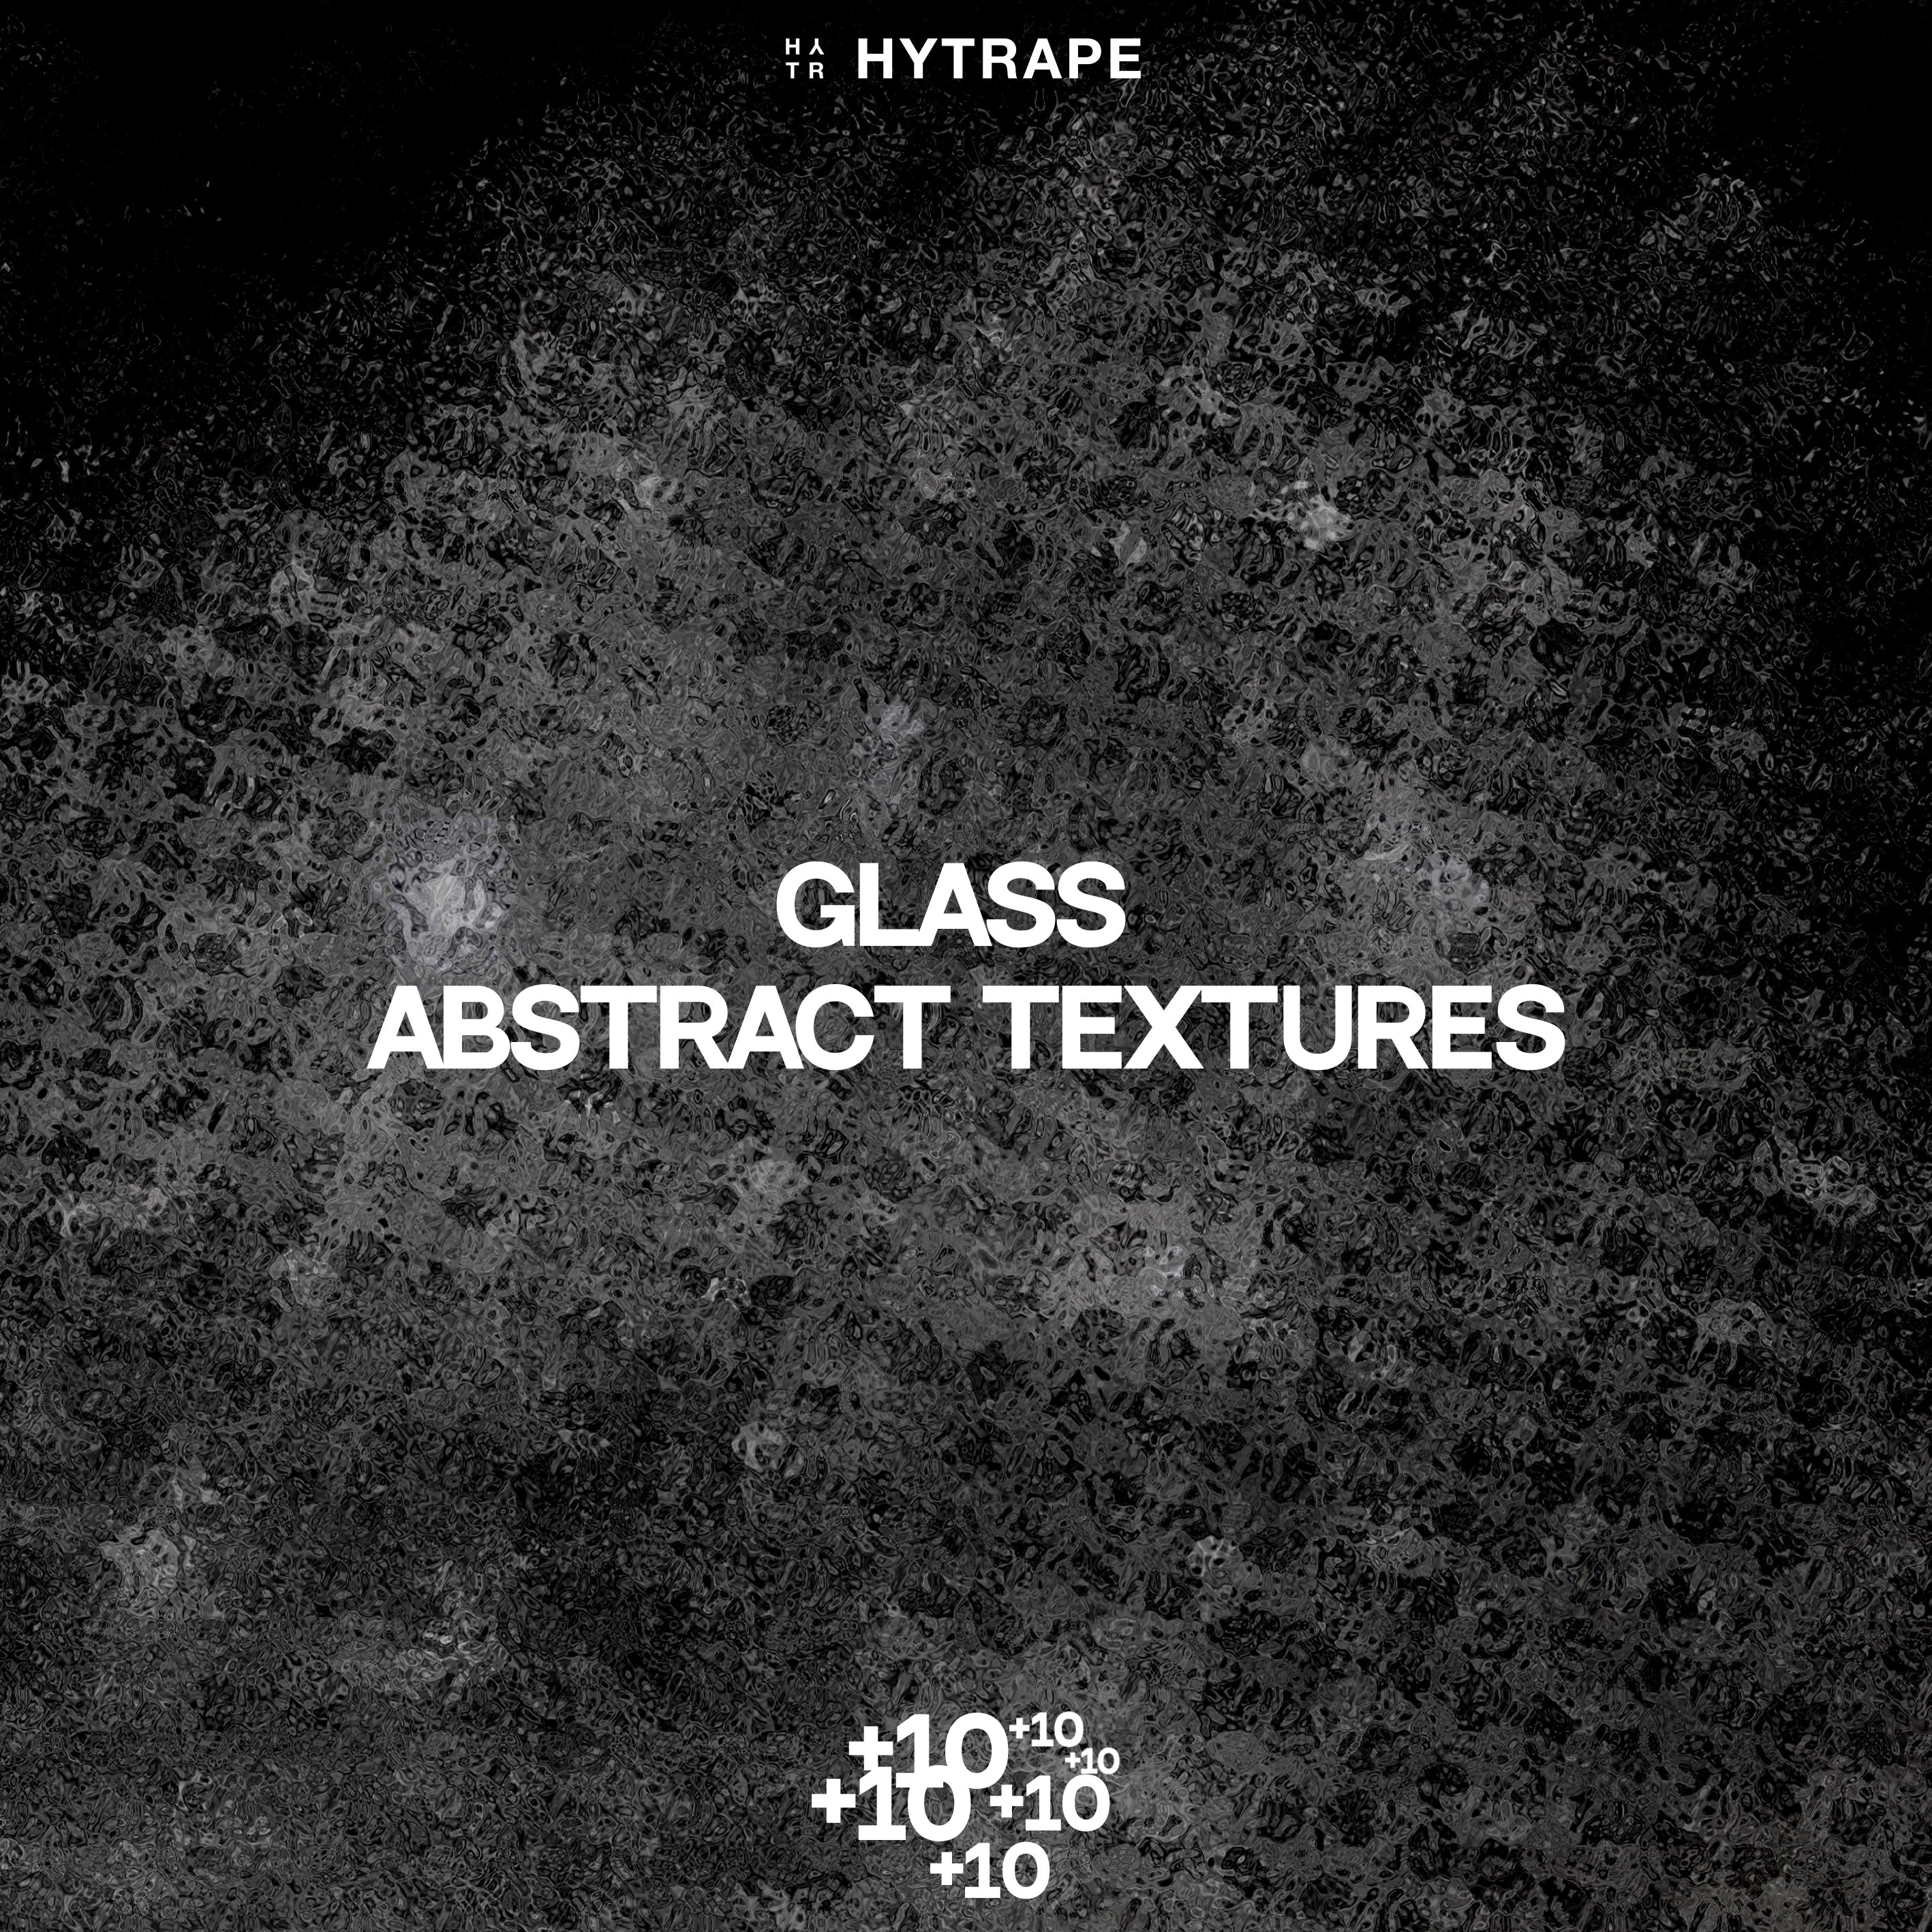 +10 GLASS ABSTRACT TEXTURES (FREE) HYTRAPE